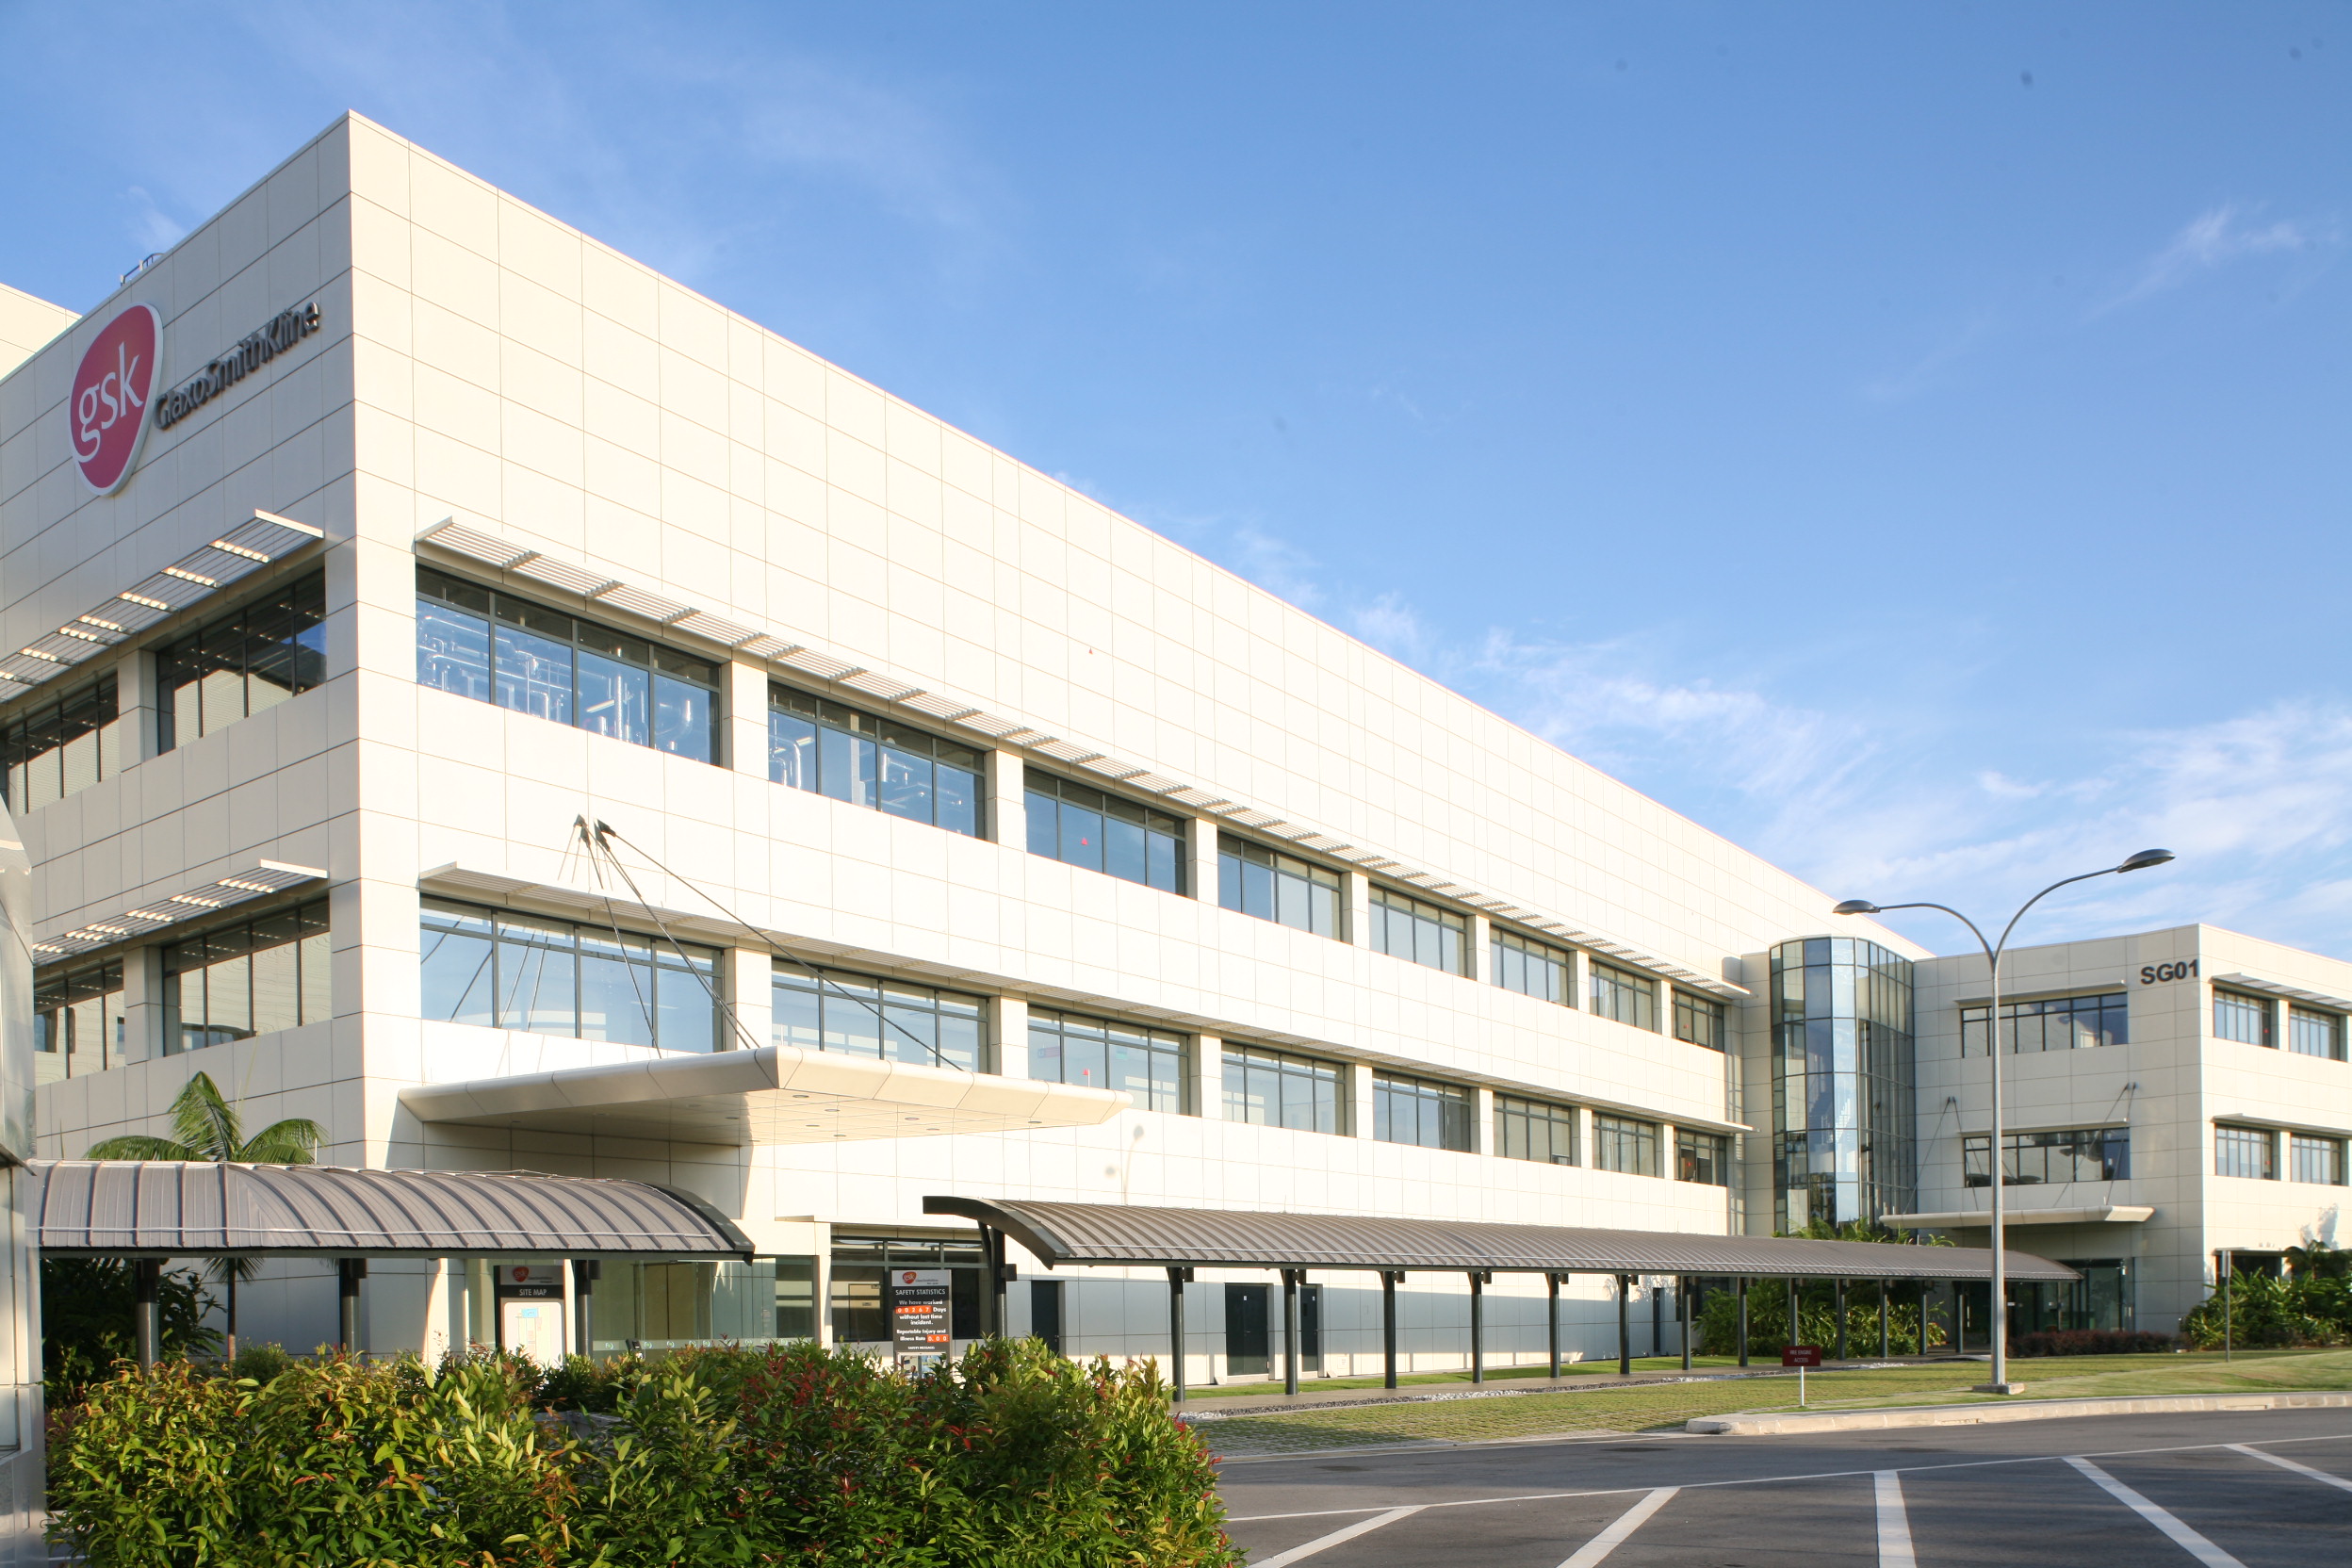 Tuas global vaccines manufacturing facility